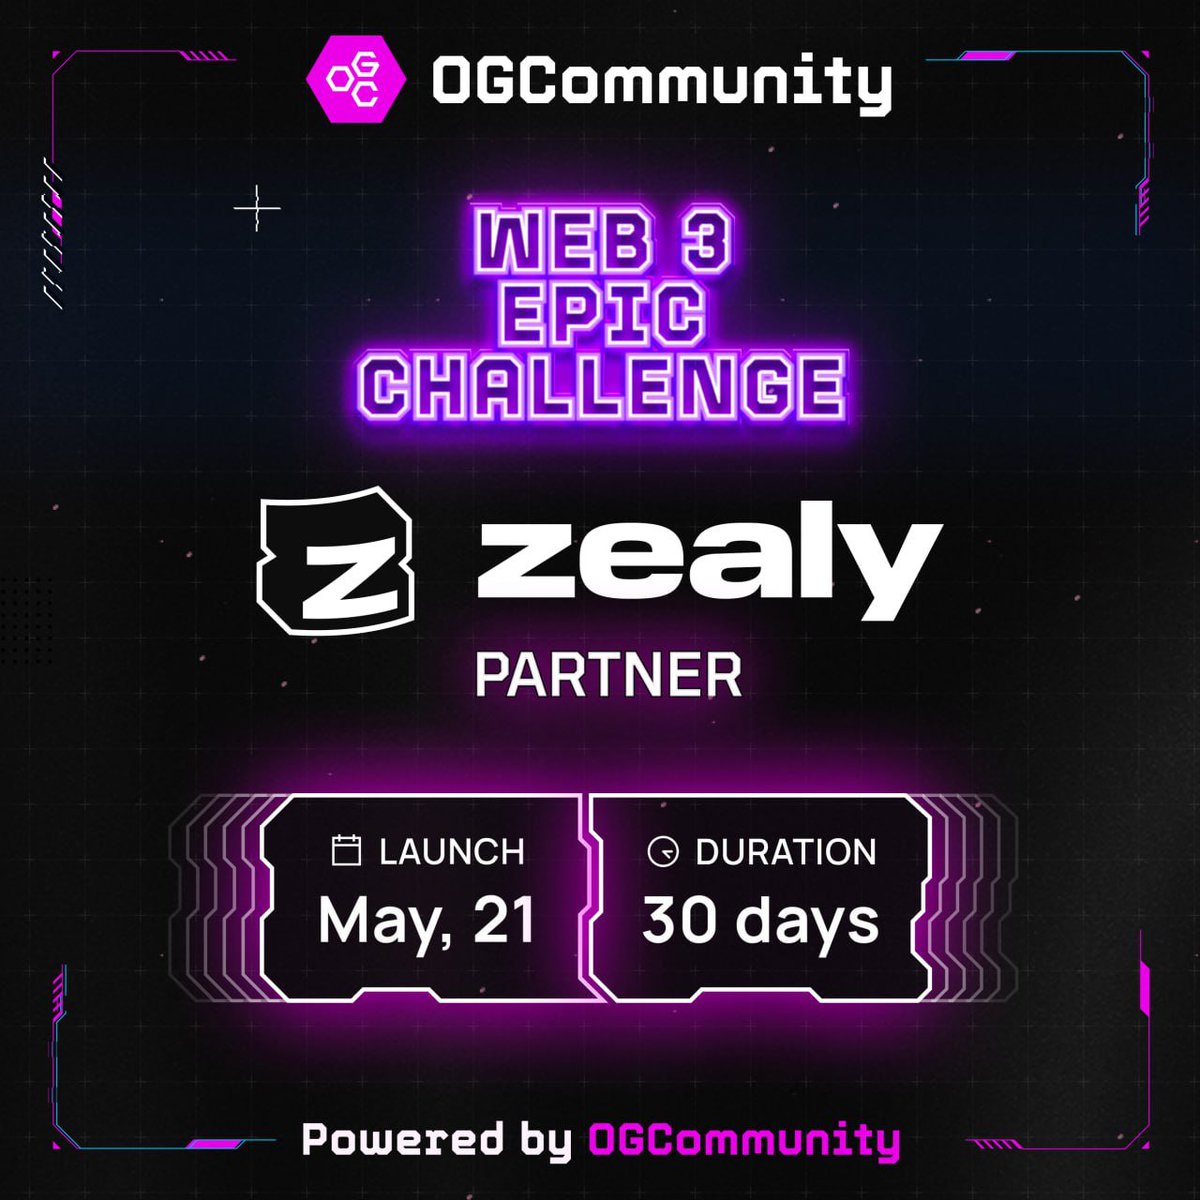 ⭐️Our First Partner for the Web3 Epic Challenge 🏅Zealy: A leader among web3 quest platforms with 1 million+ monthly active users. This is exactly where the Web3 Epic Challenge with a prize pool of $50,000 USDT unfolds! ✅Feel the magnitude of Zealy zealy.io: